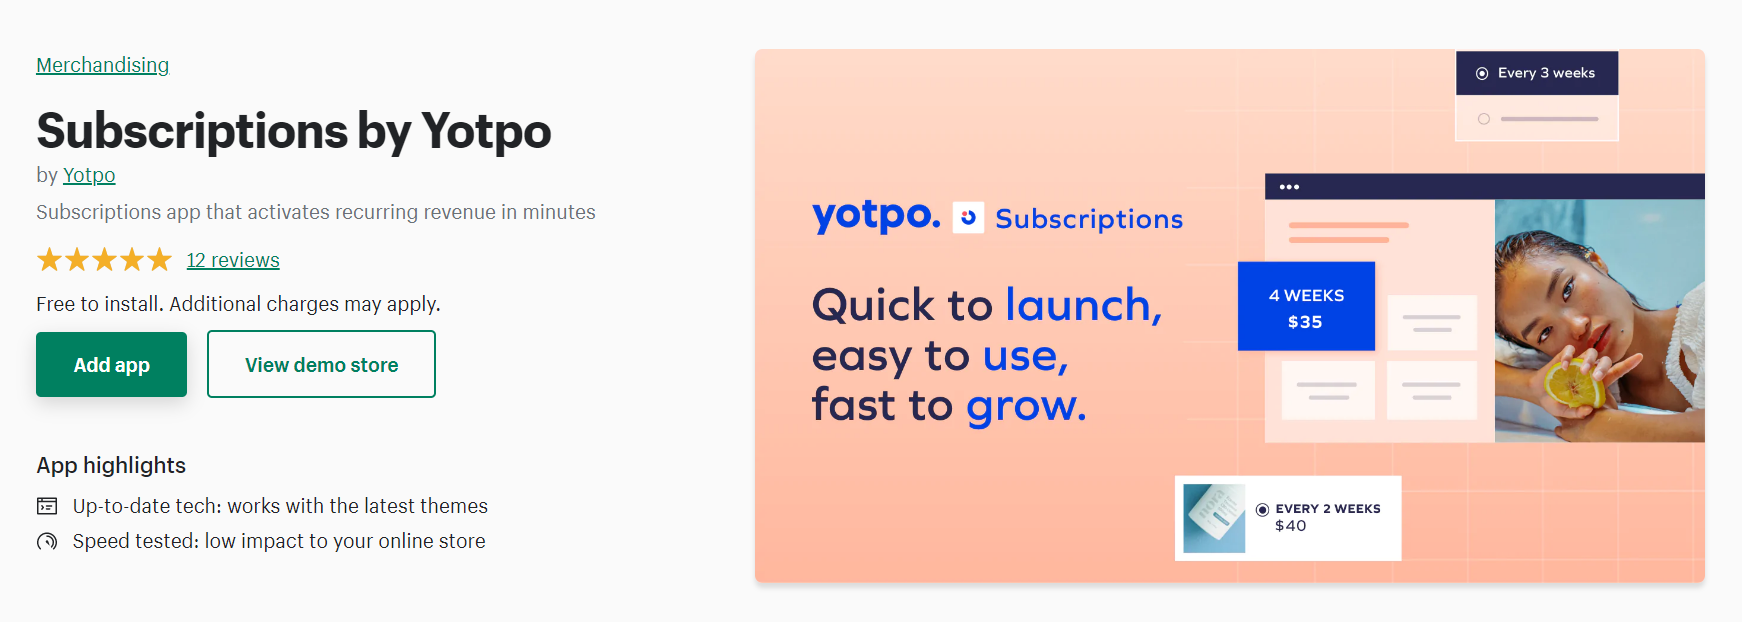 subscription by Yotpo